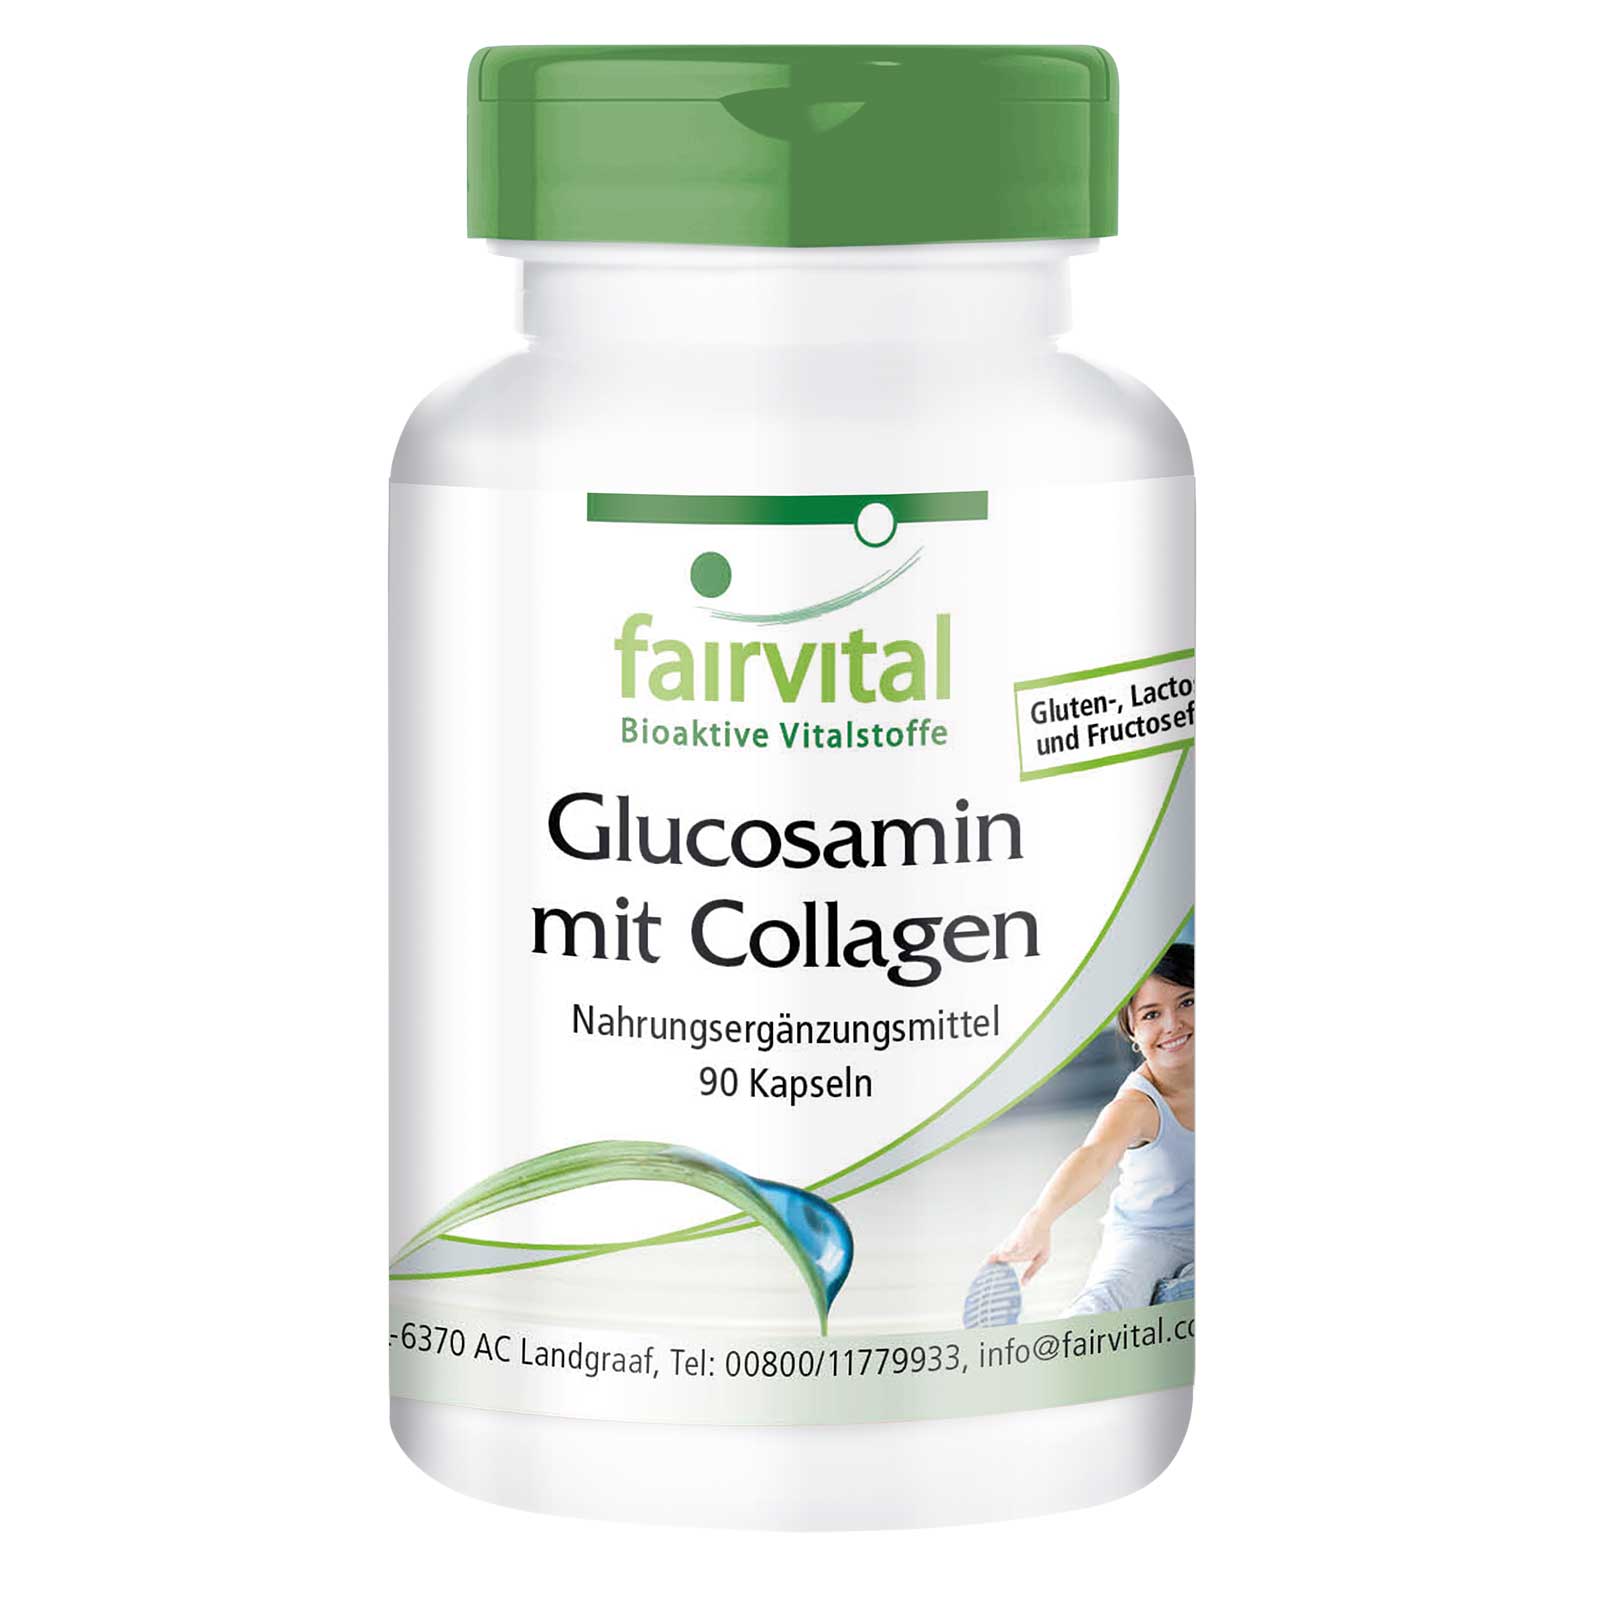 Glucosamine with collagen - 90 capsules - Sale- MHD 04/25